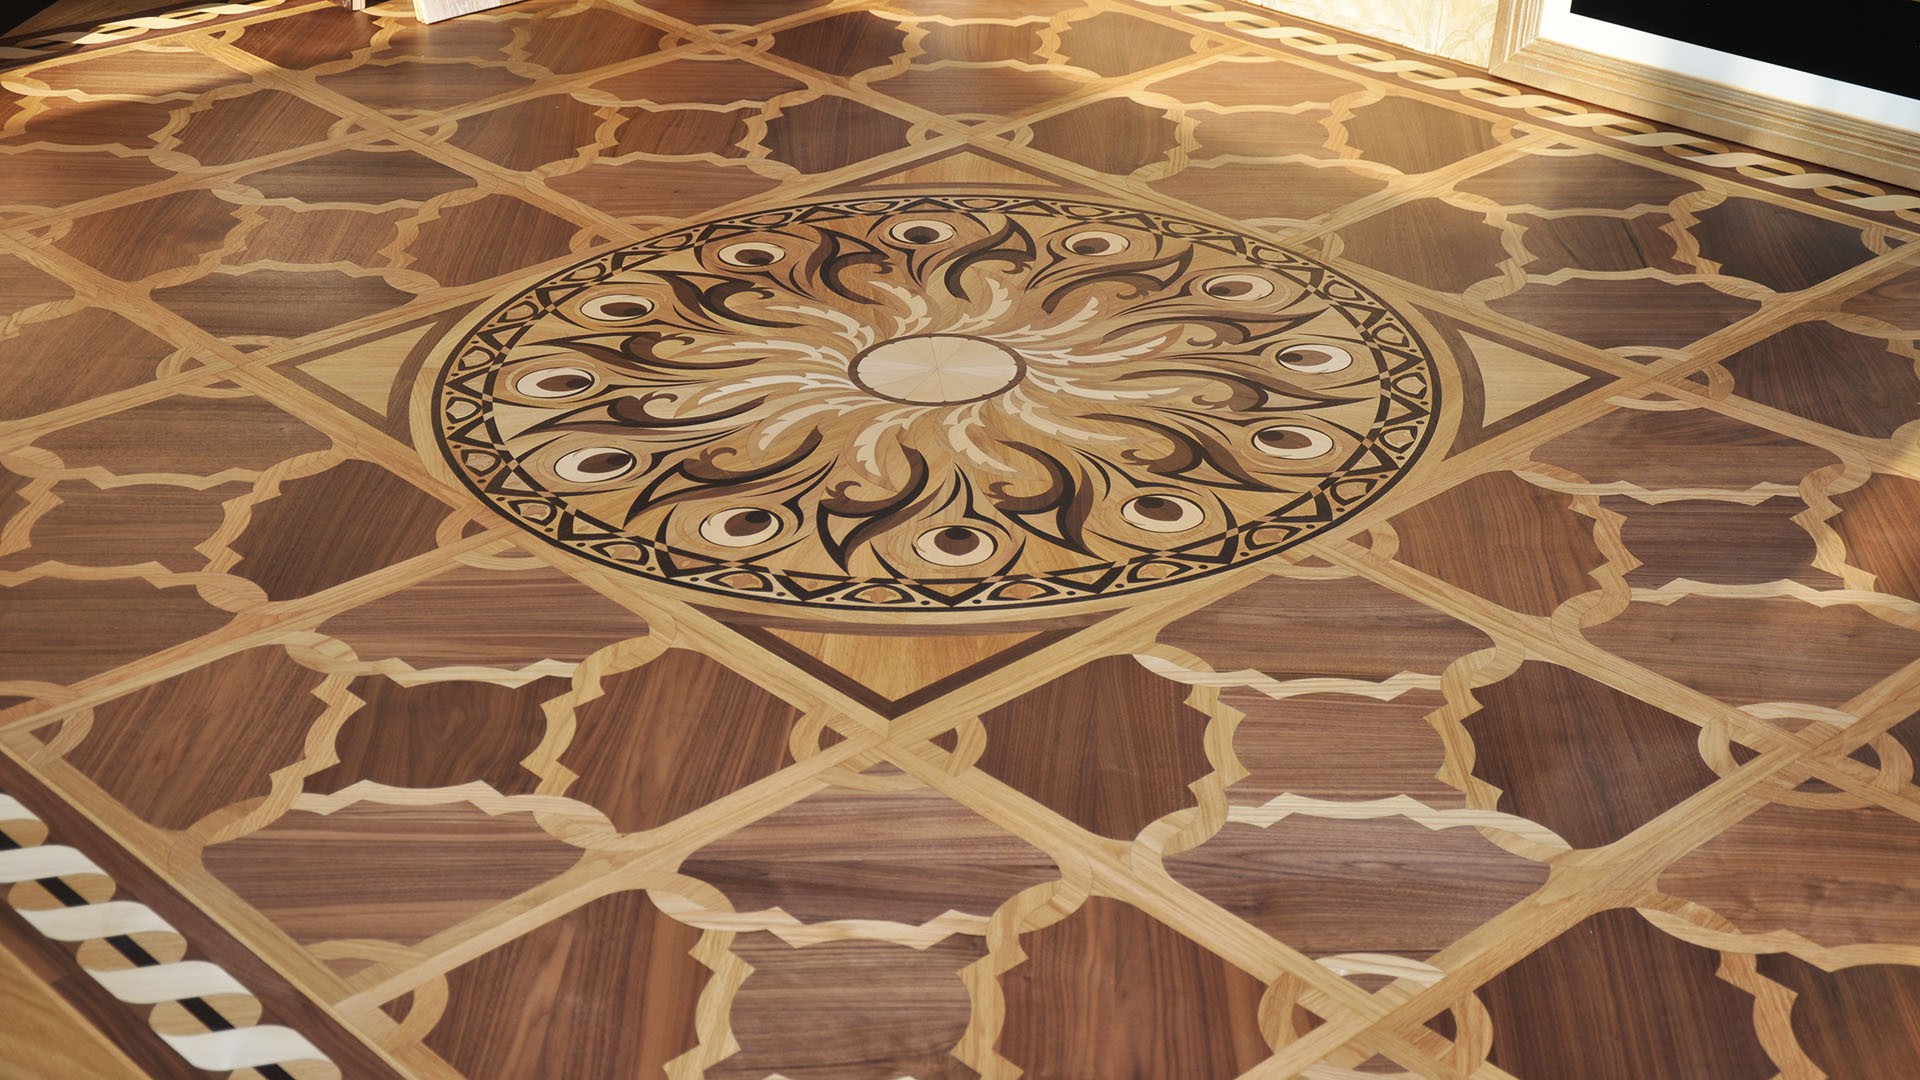 Luxury Wood Flooring Unique Designs Marquetry Style London S